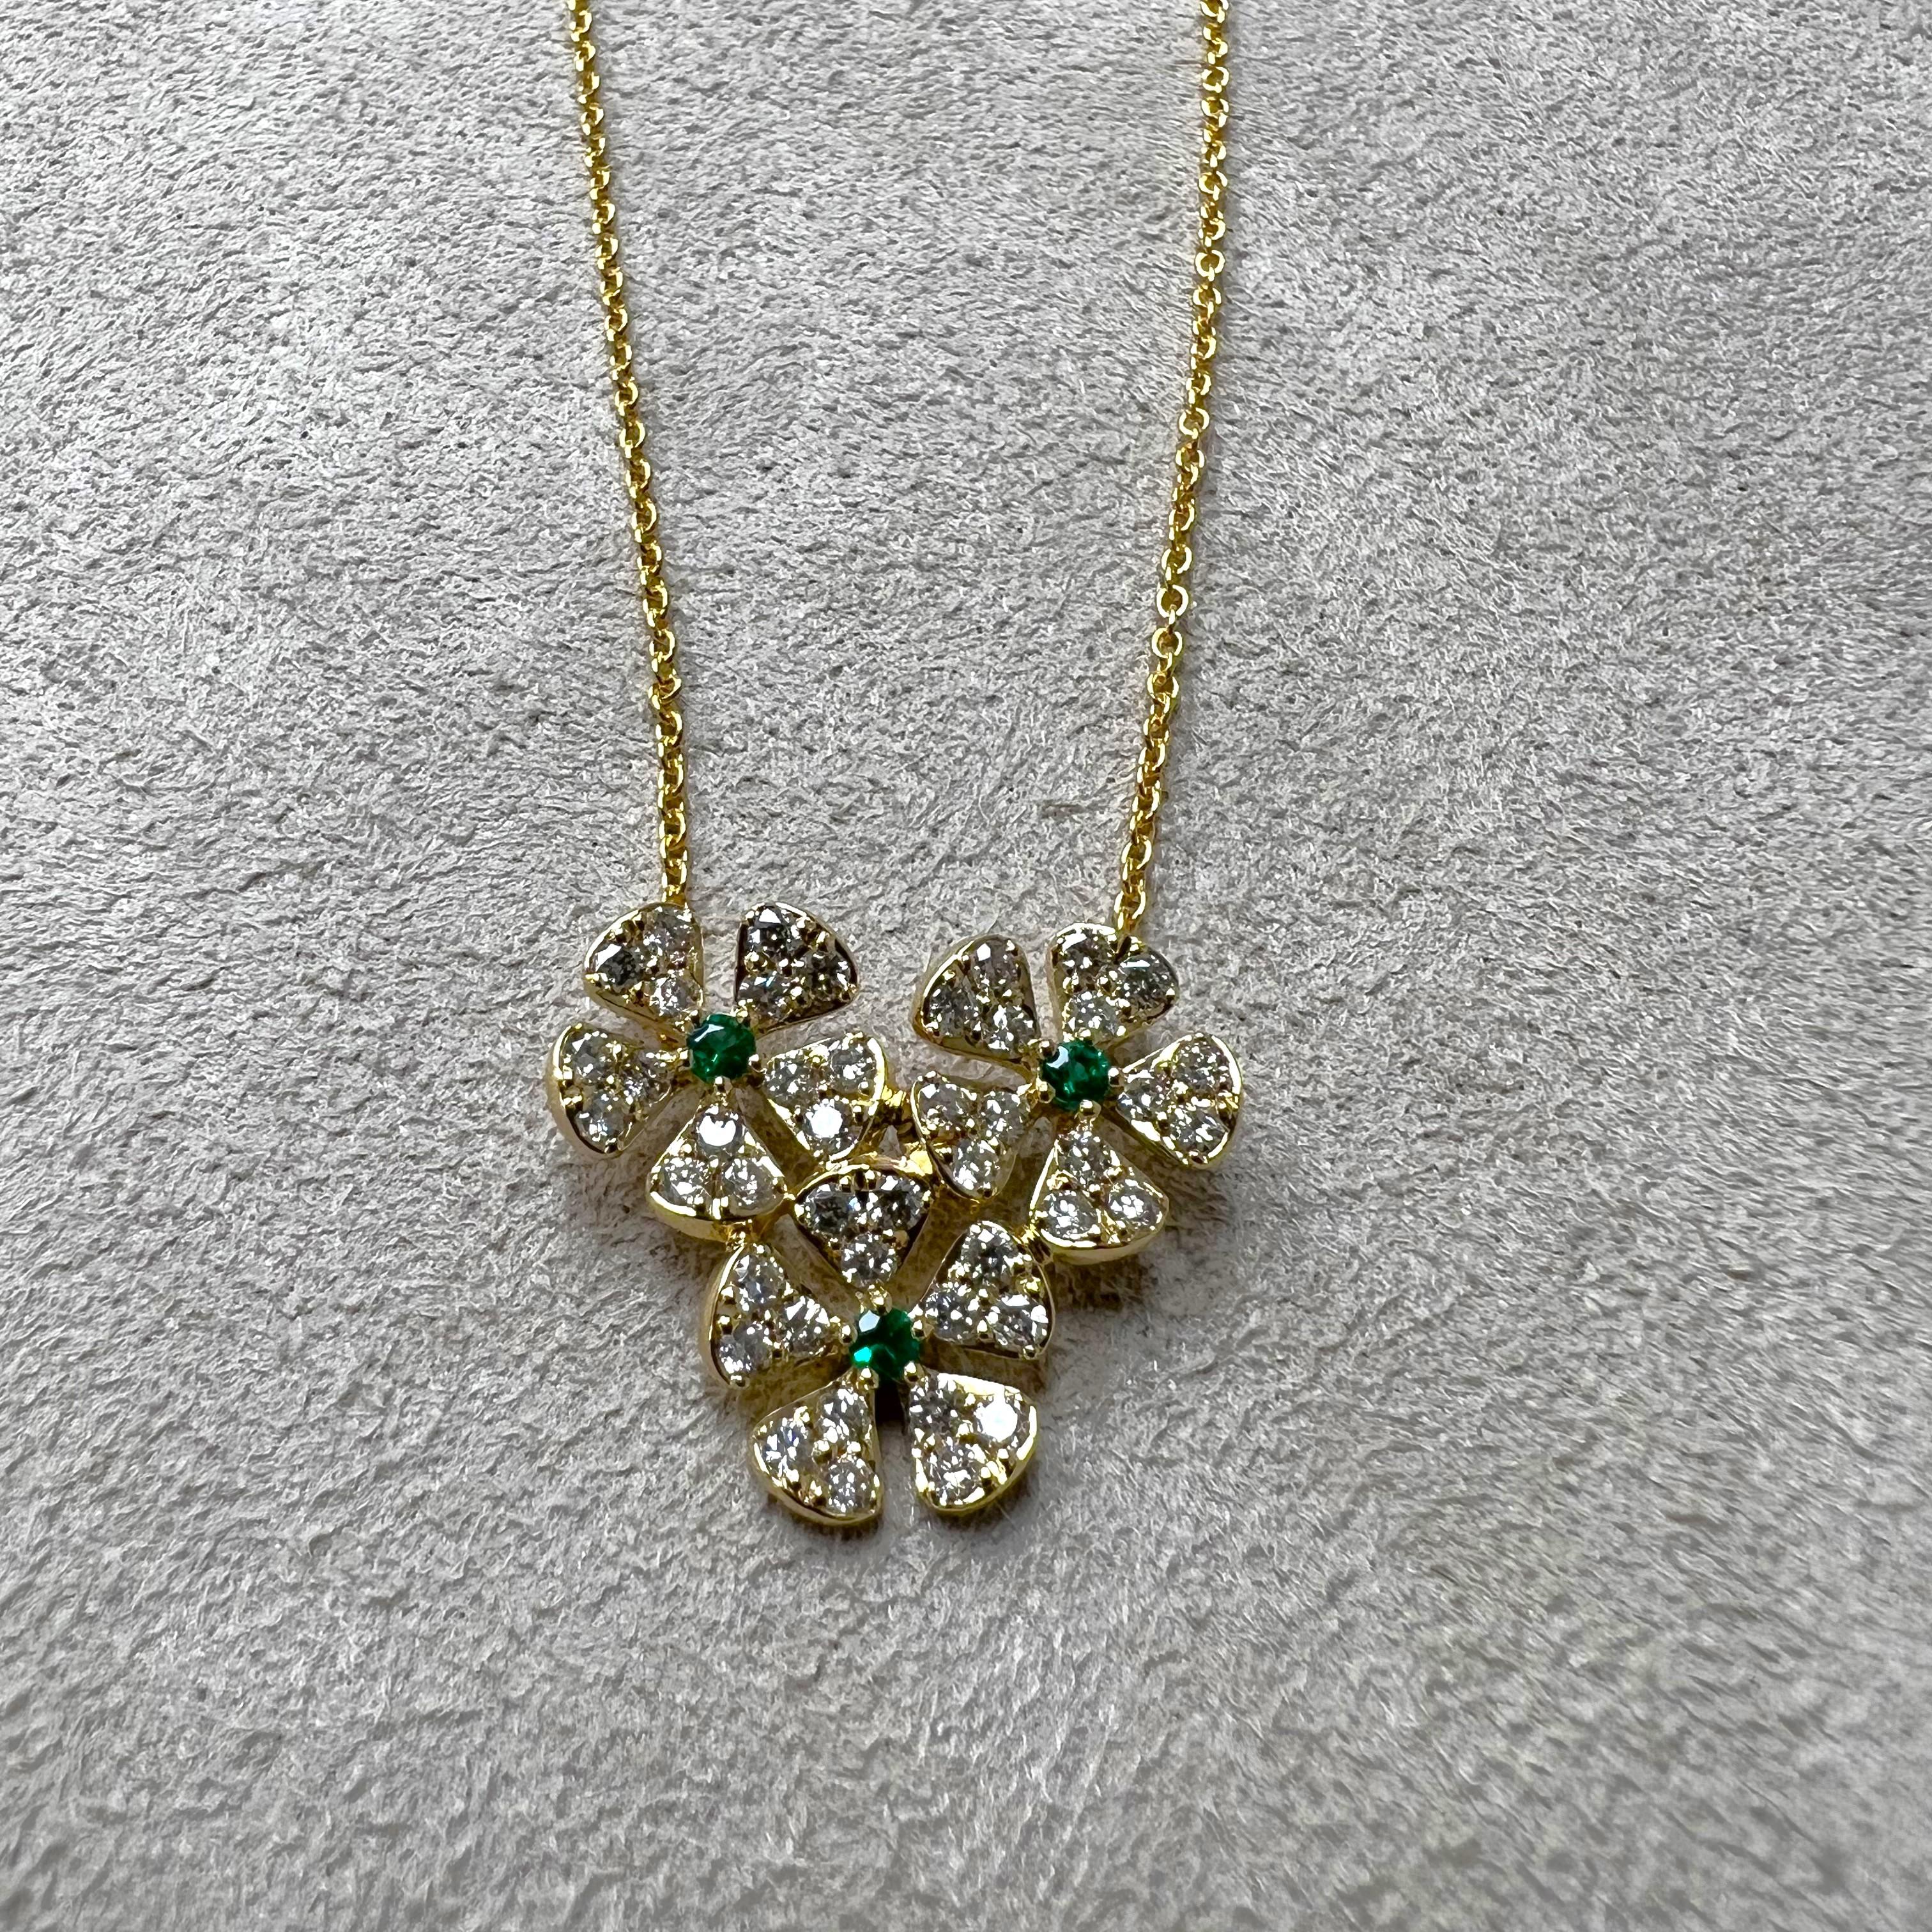 Created in 18 karat yellow gold
Emeralds 0.10 carat approx.
Diamonds 0.65 carat approx.
18 inch chain with loops at 16 & 17th inch
18 kyg lobster lock

Exquisitely crafted in 18-karat yellow gold, this magnificent necklace is adorned with a